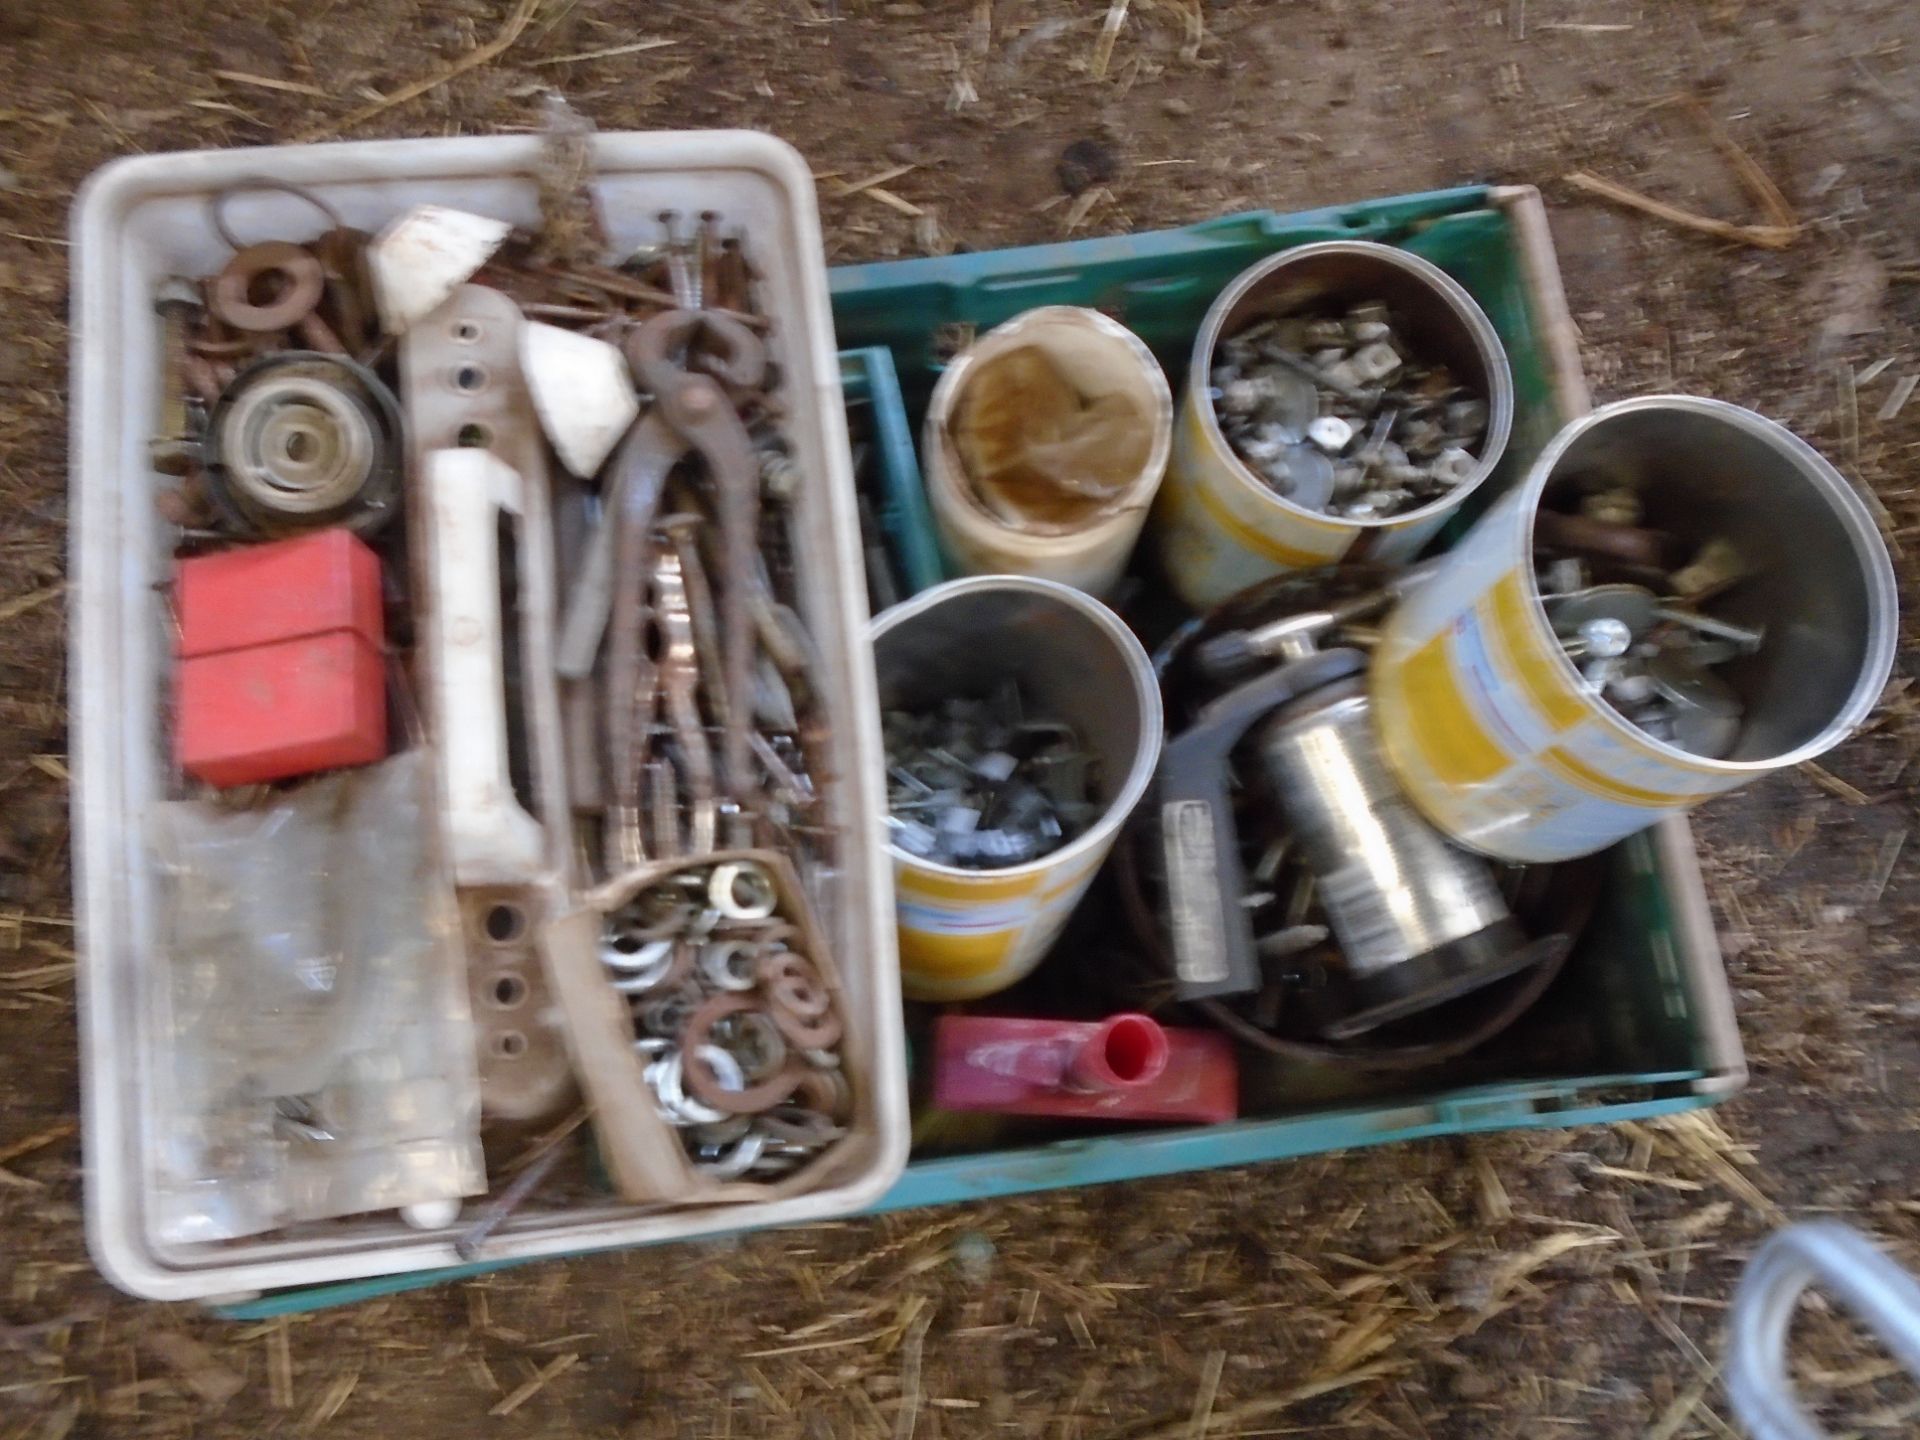 2 Boxes of nuts & bolts etc